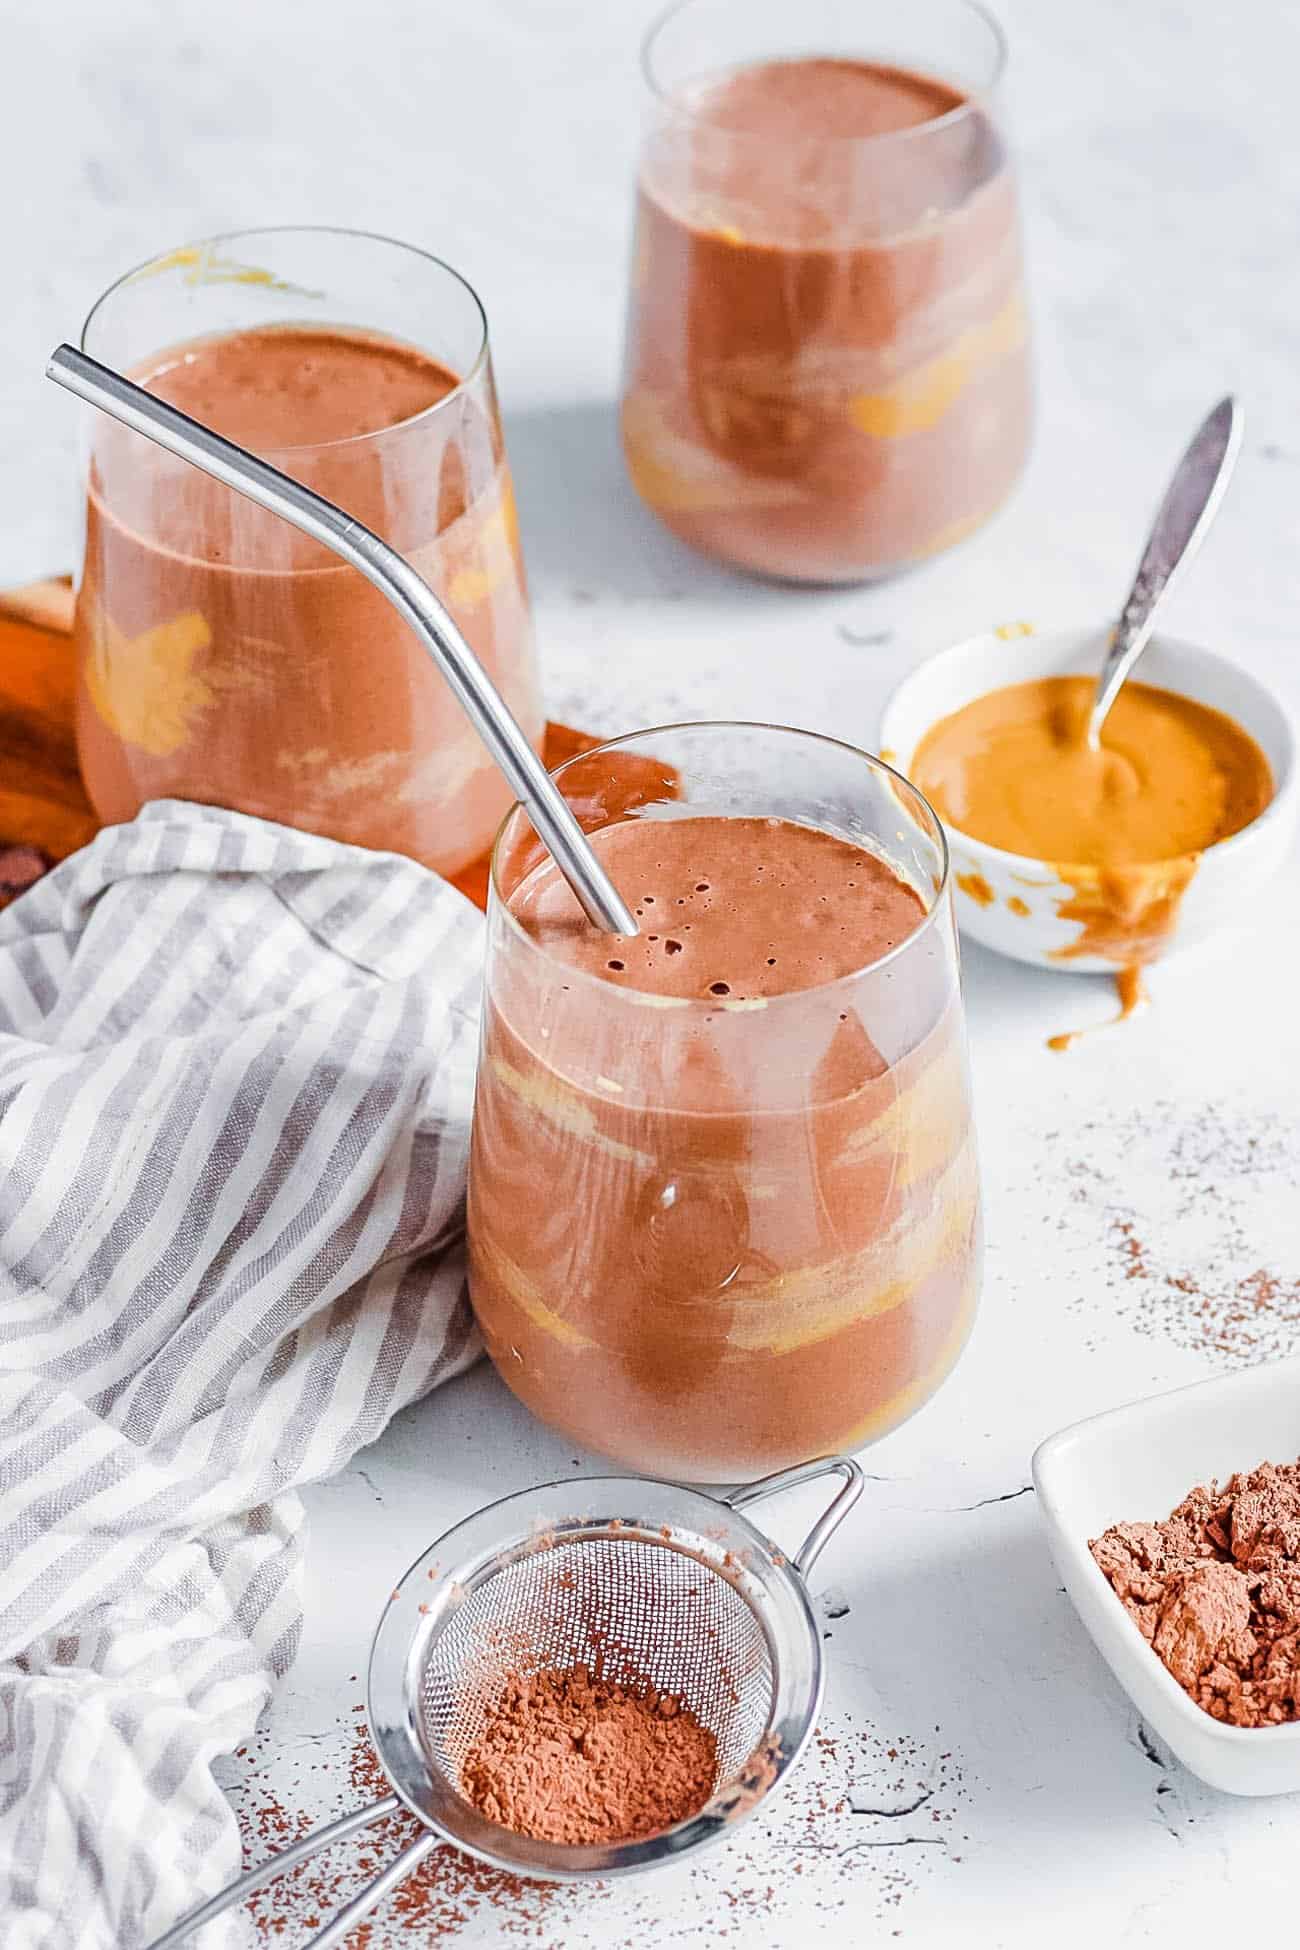 easy healthy keto low carb chocolate avocado peanut butter smoothie recipe in a glass